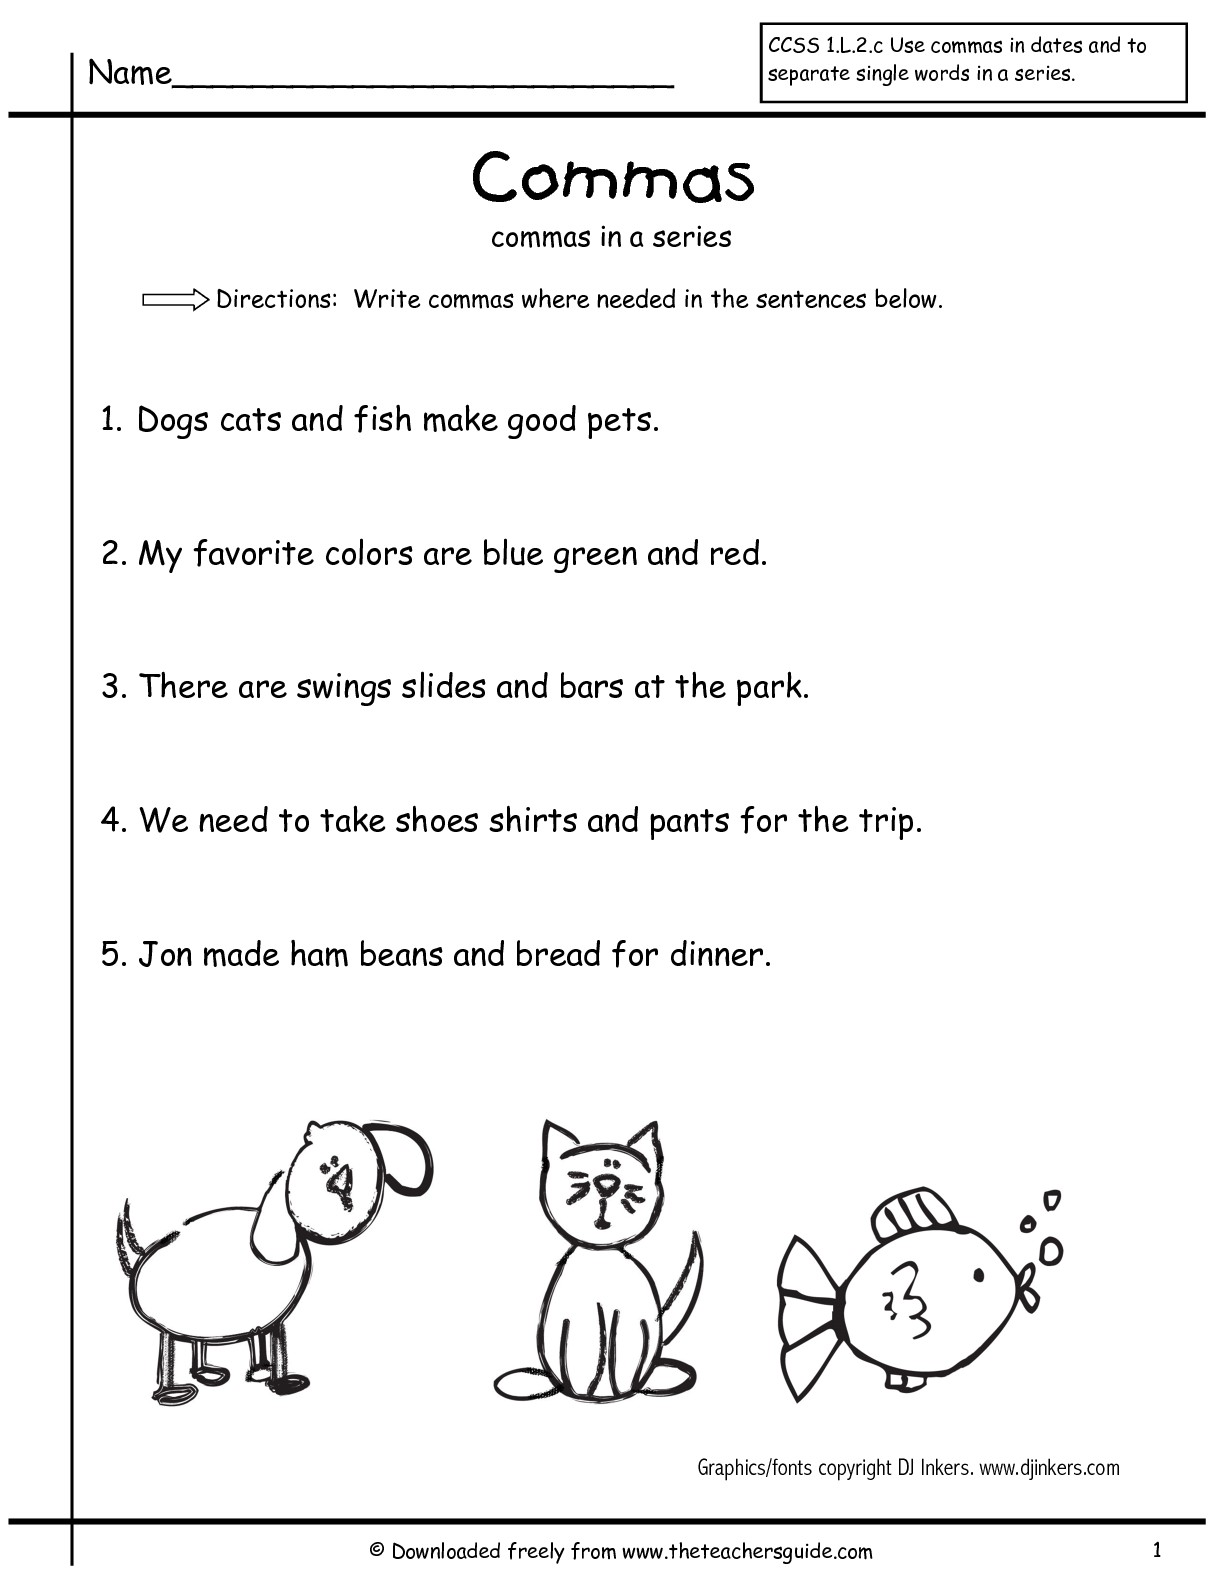 16 Best Images of Series Comma Worksheets - First Grade Comma Worksheet